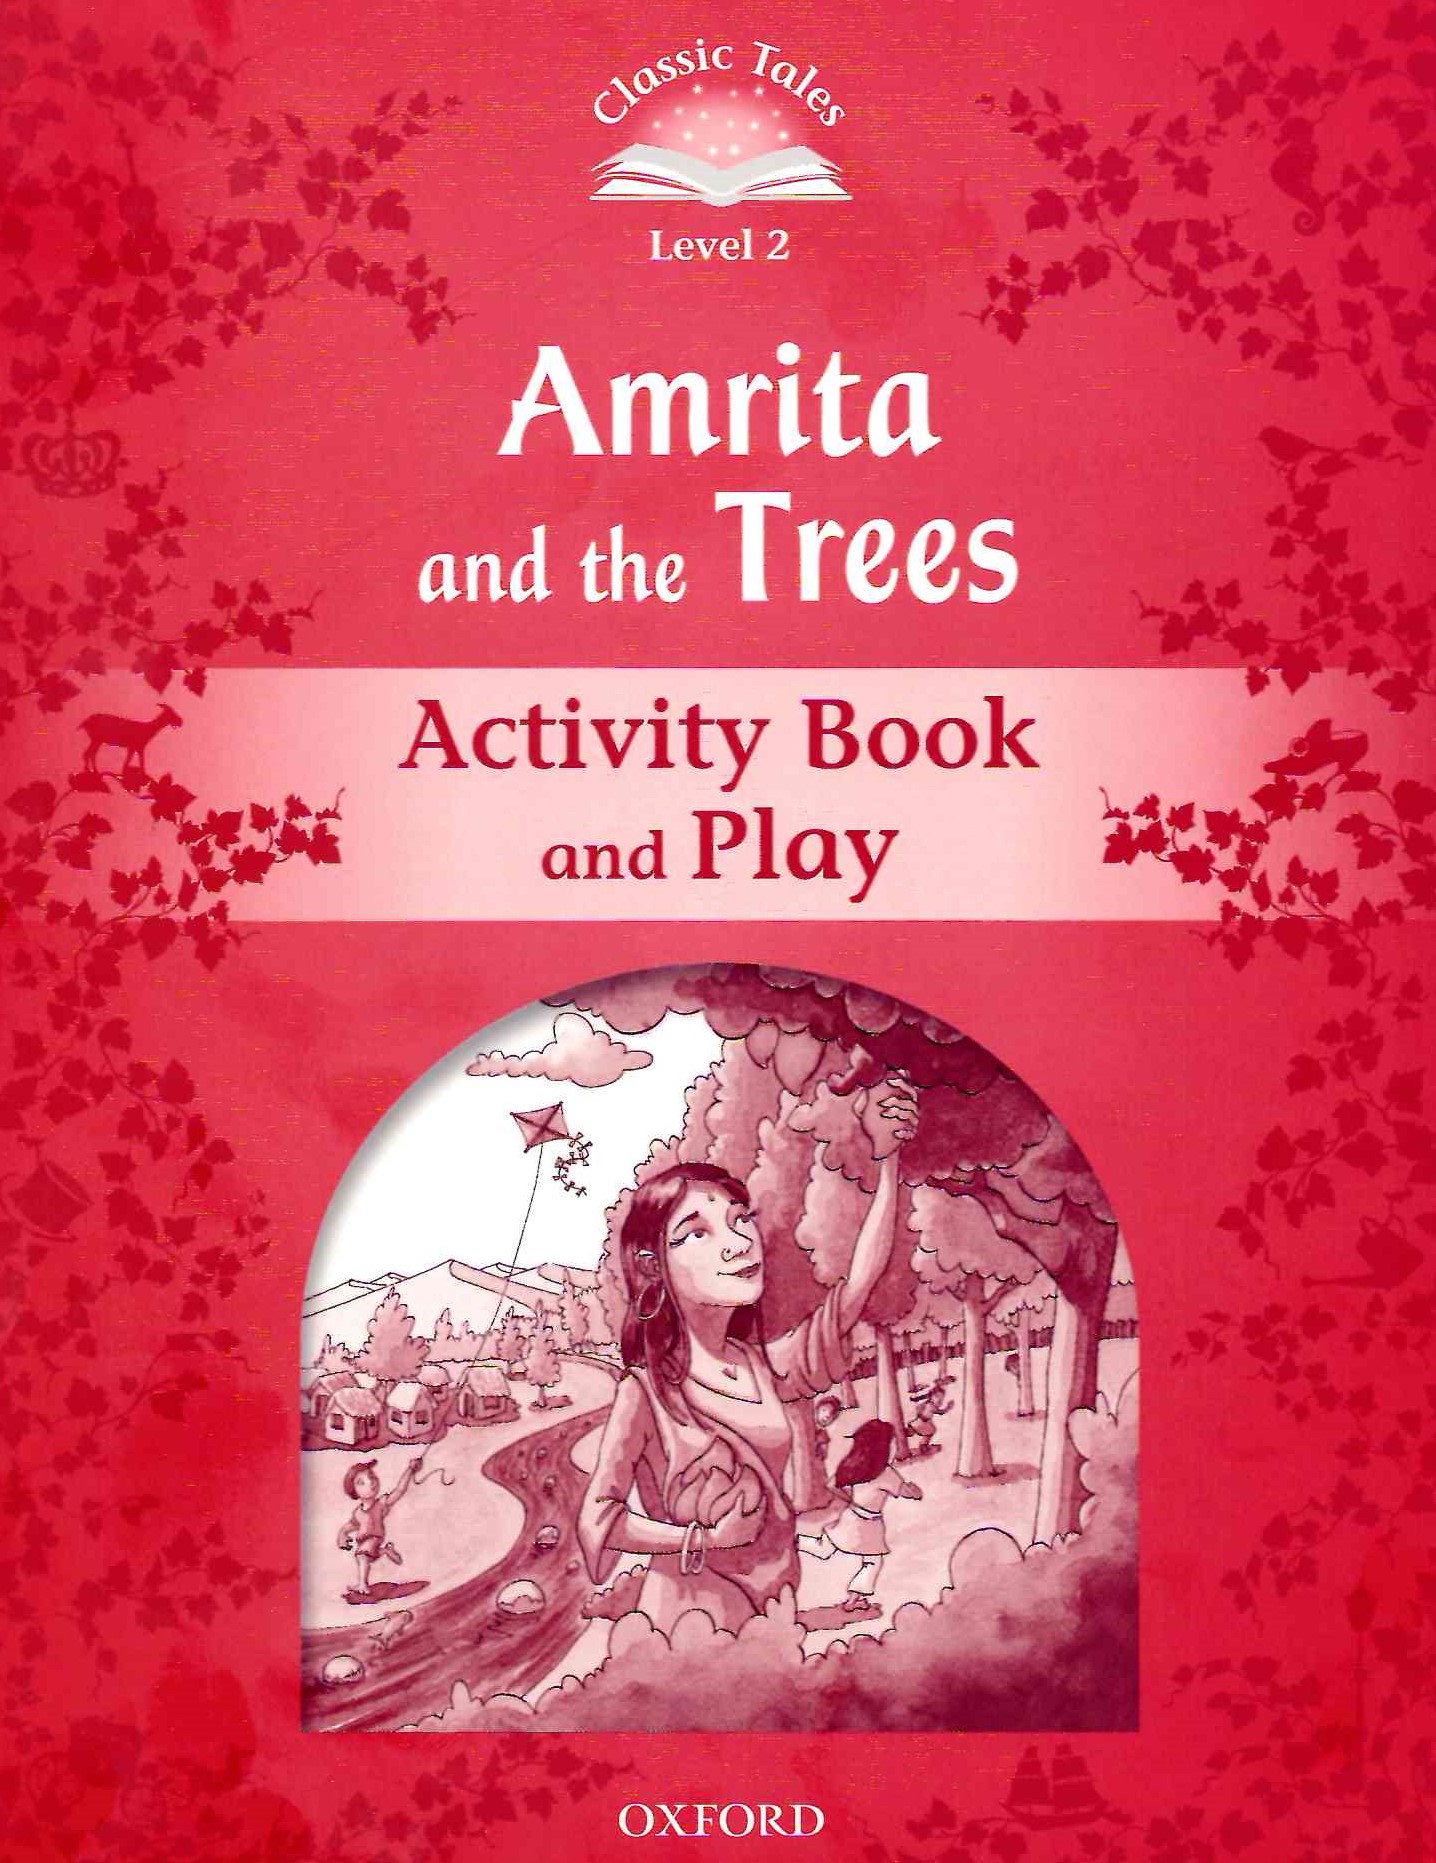 Amrita and the Trees Activity Book and Play